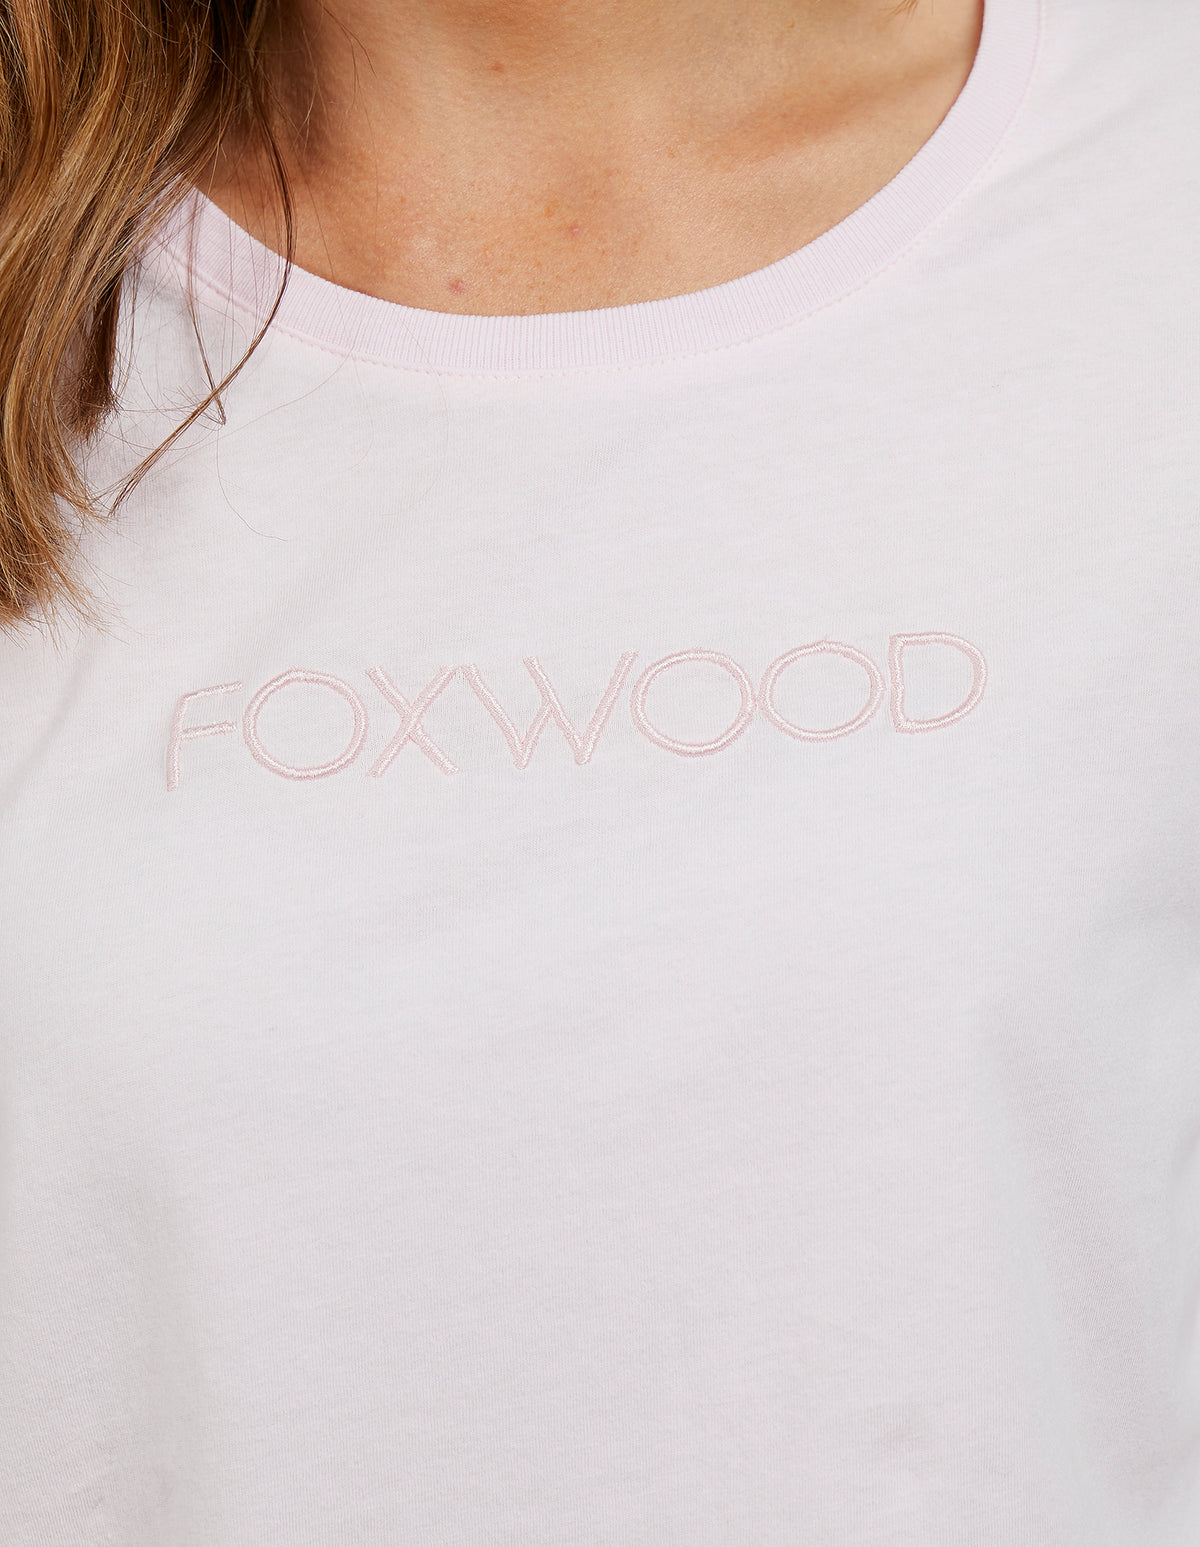 Foxwood L/S Tee - Pink - Foxwood - FUDGE Gifts Home Lifestyle